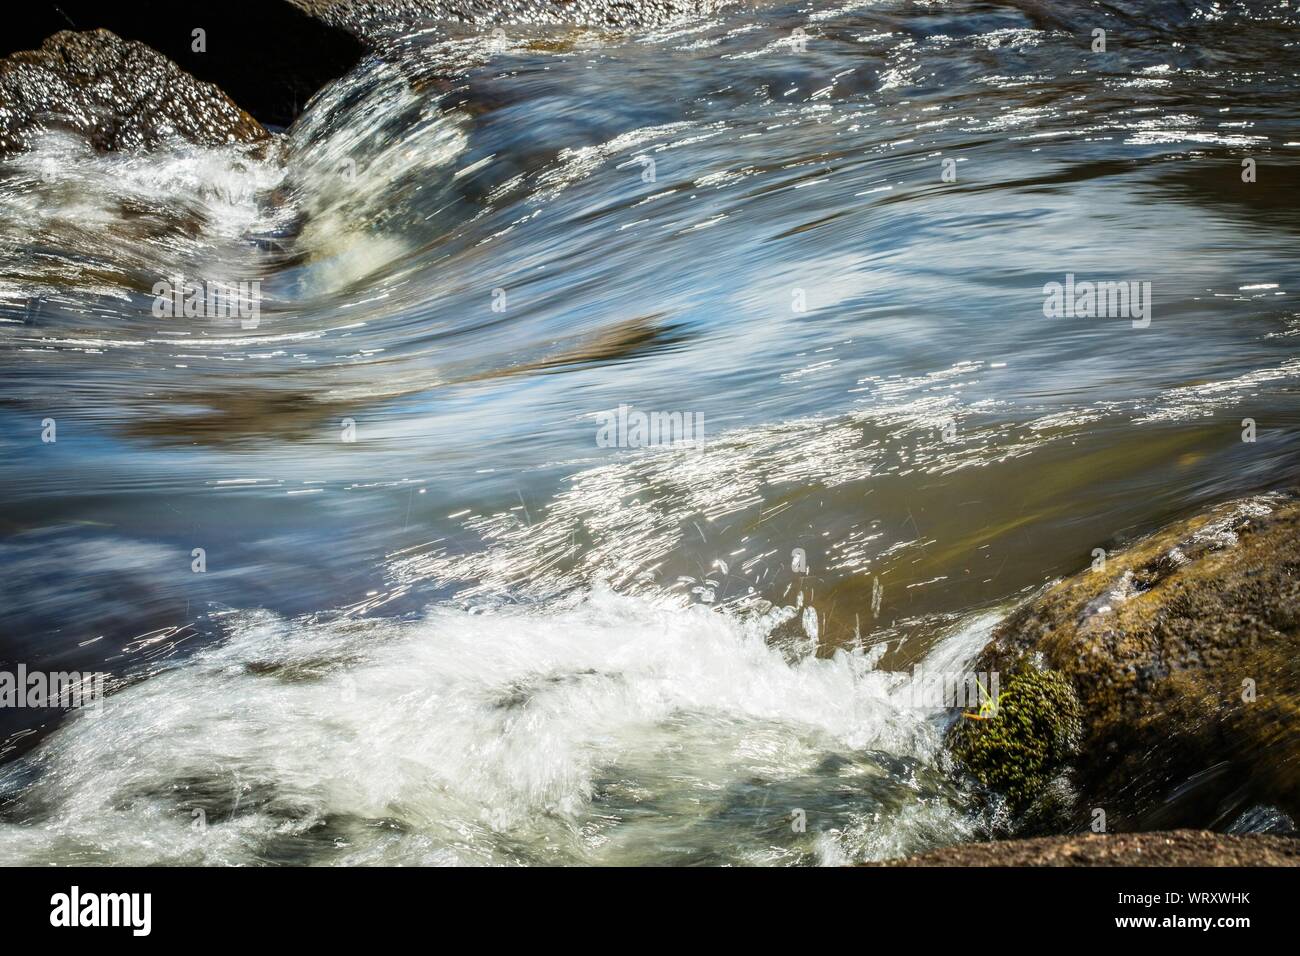 View Of Flowing Water Stock Photo